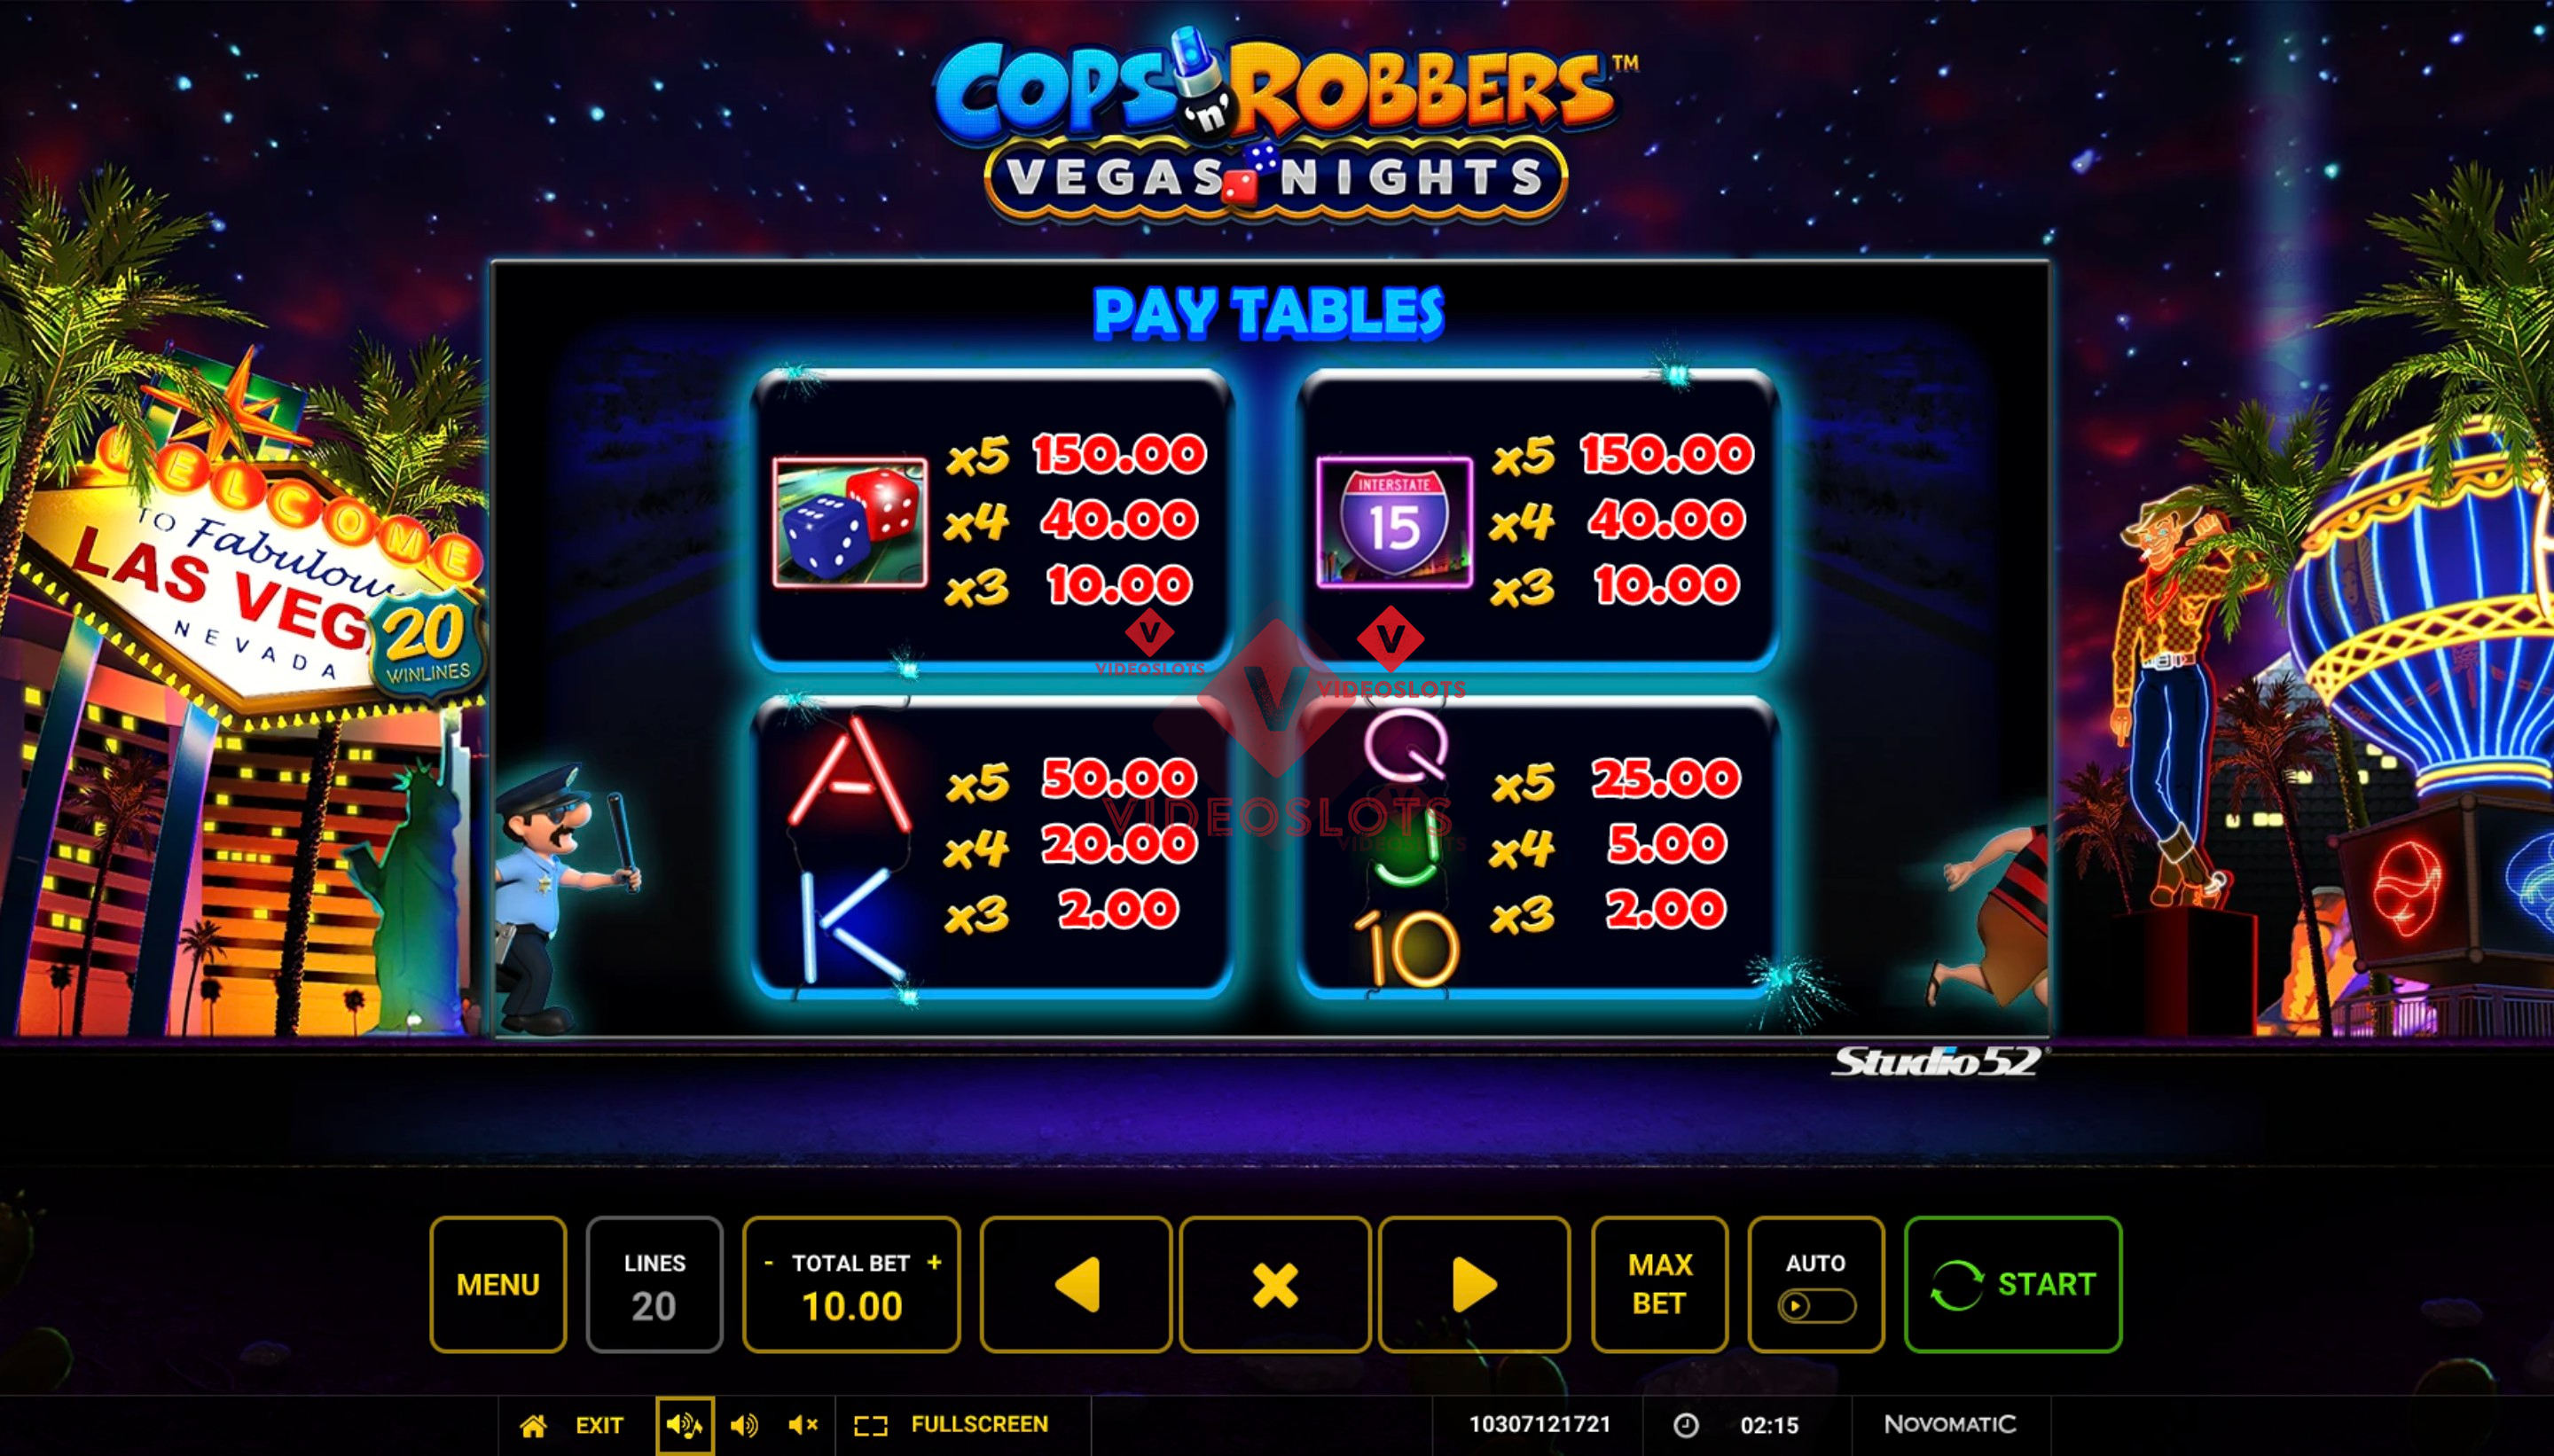 Pay Table for Cops 'n' Robbers Vegas Nights slot from Greentube